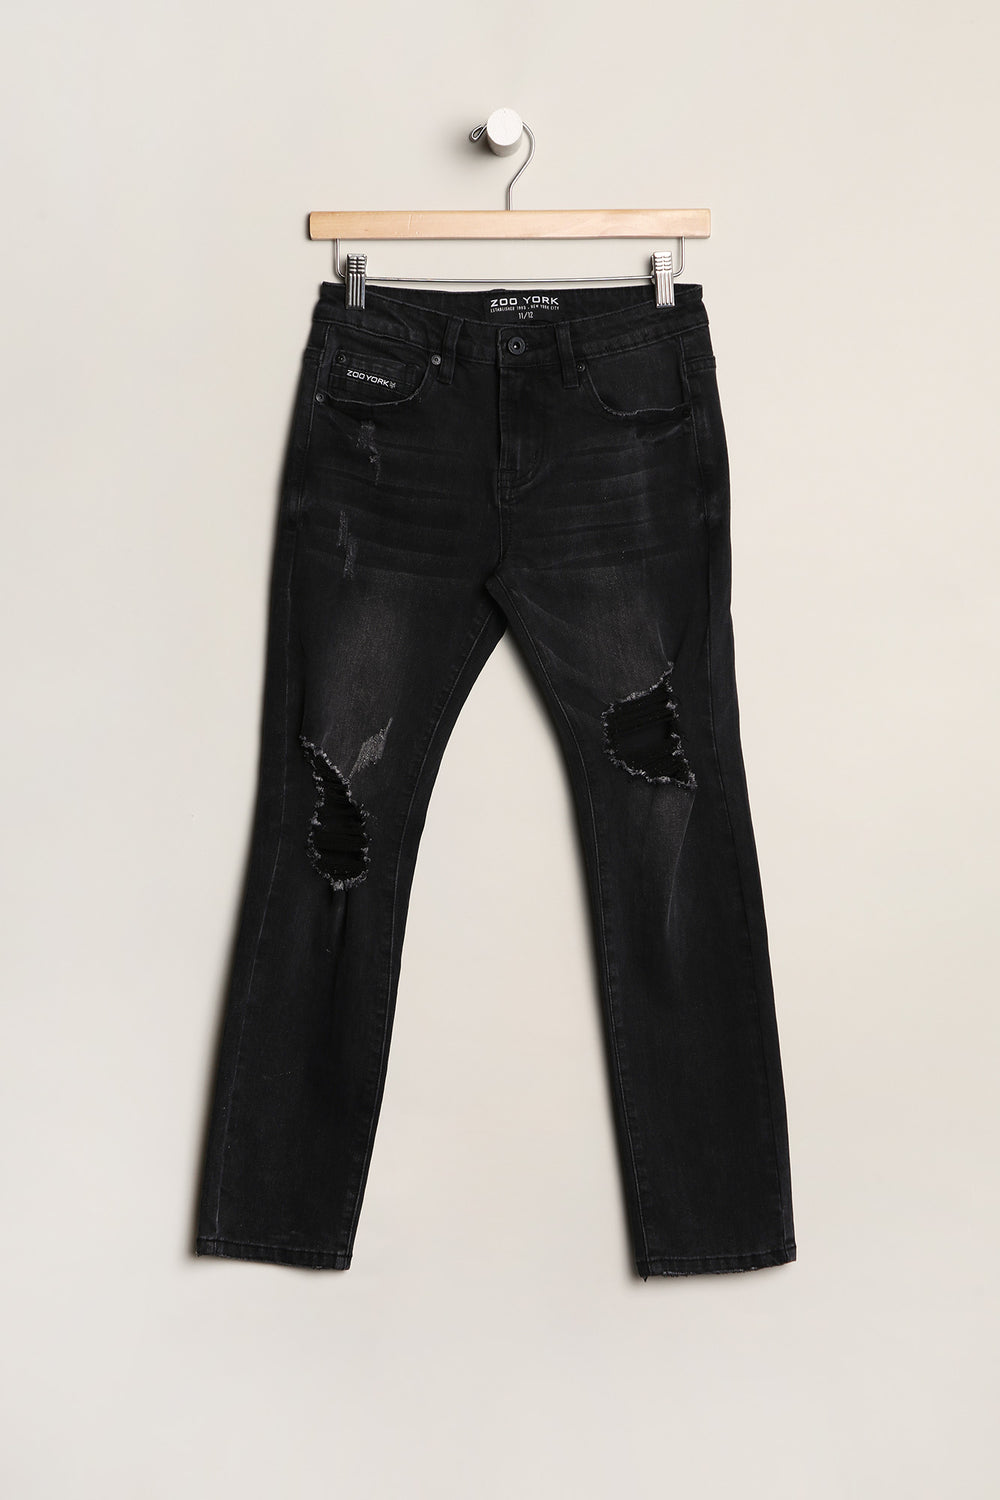 Zoo York Youth Skinny Distressed Jeans Solid Black